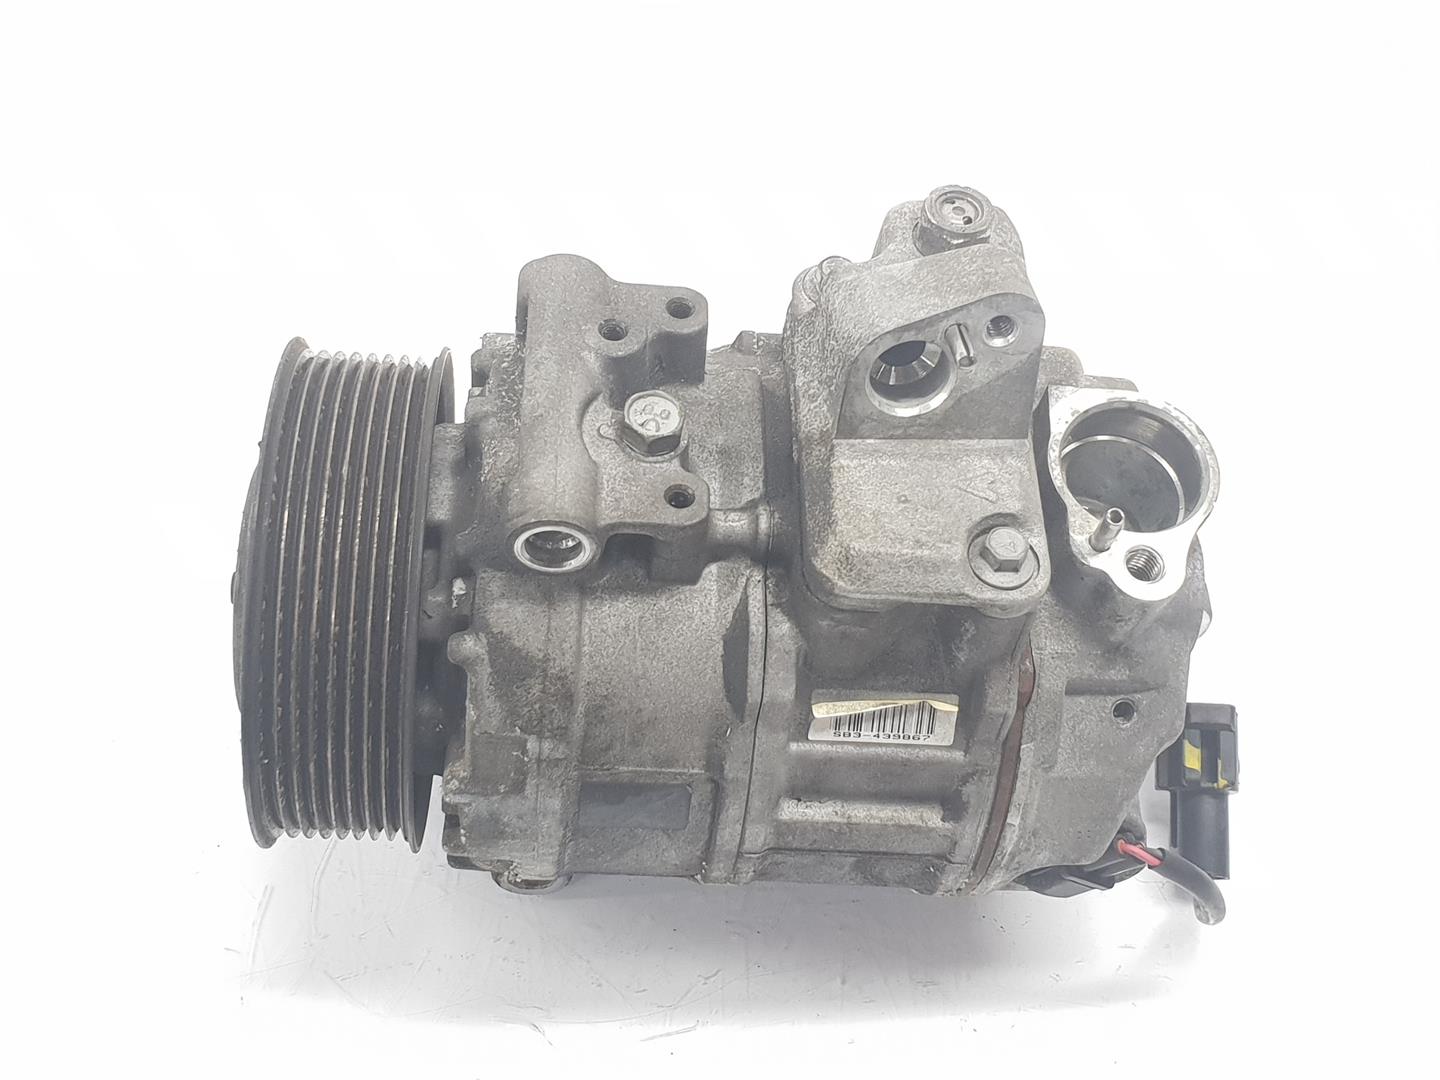 IVECO Discovery 3 generation (2004-2009) Aircondition pumpe JPB000183, JPB000183 24237433